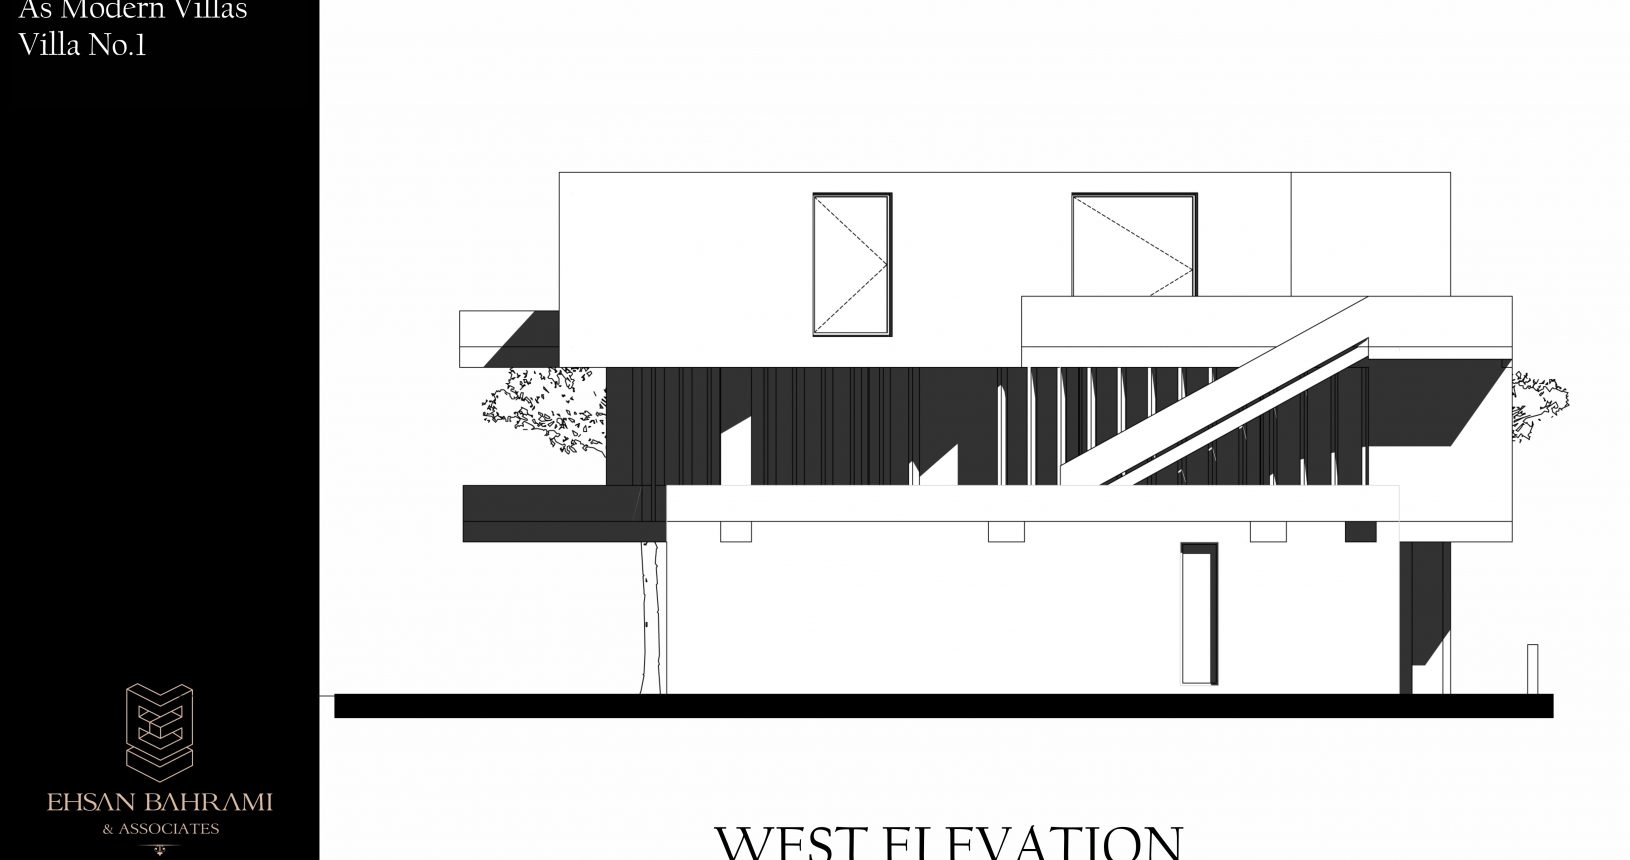 As Vill No.1 West Elevation